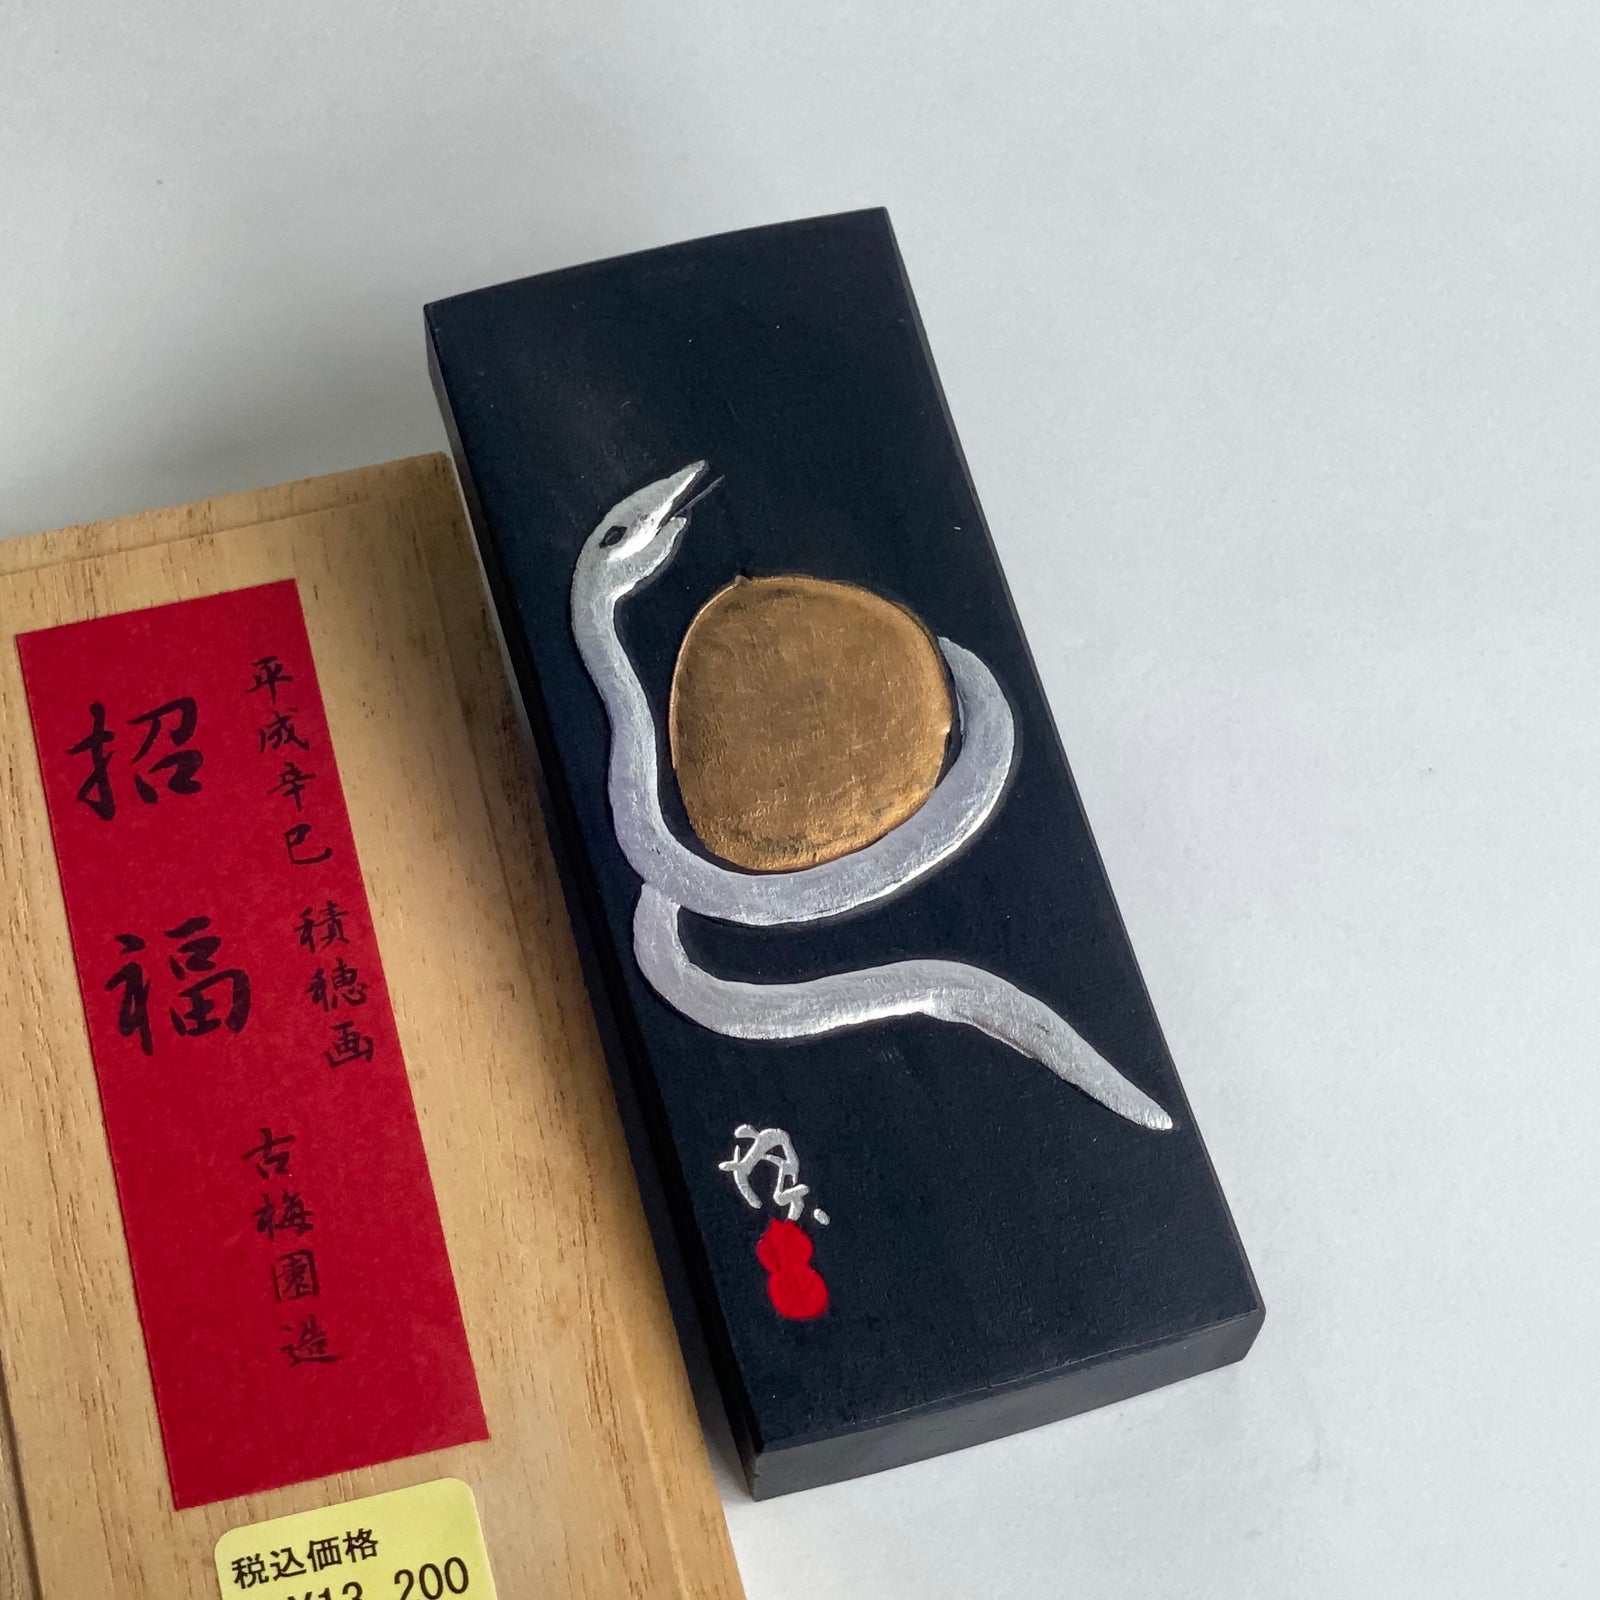 Snake, Kobaien's new year's commemorate inkstick 招福墨・蛇